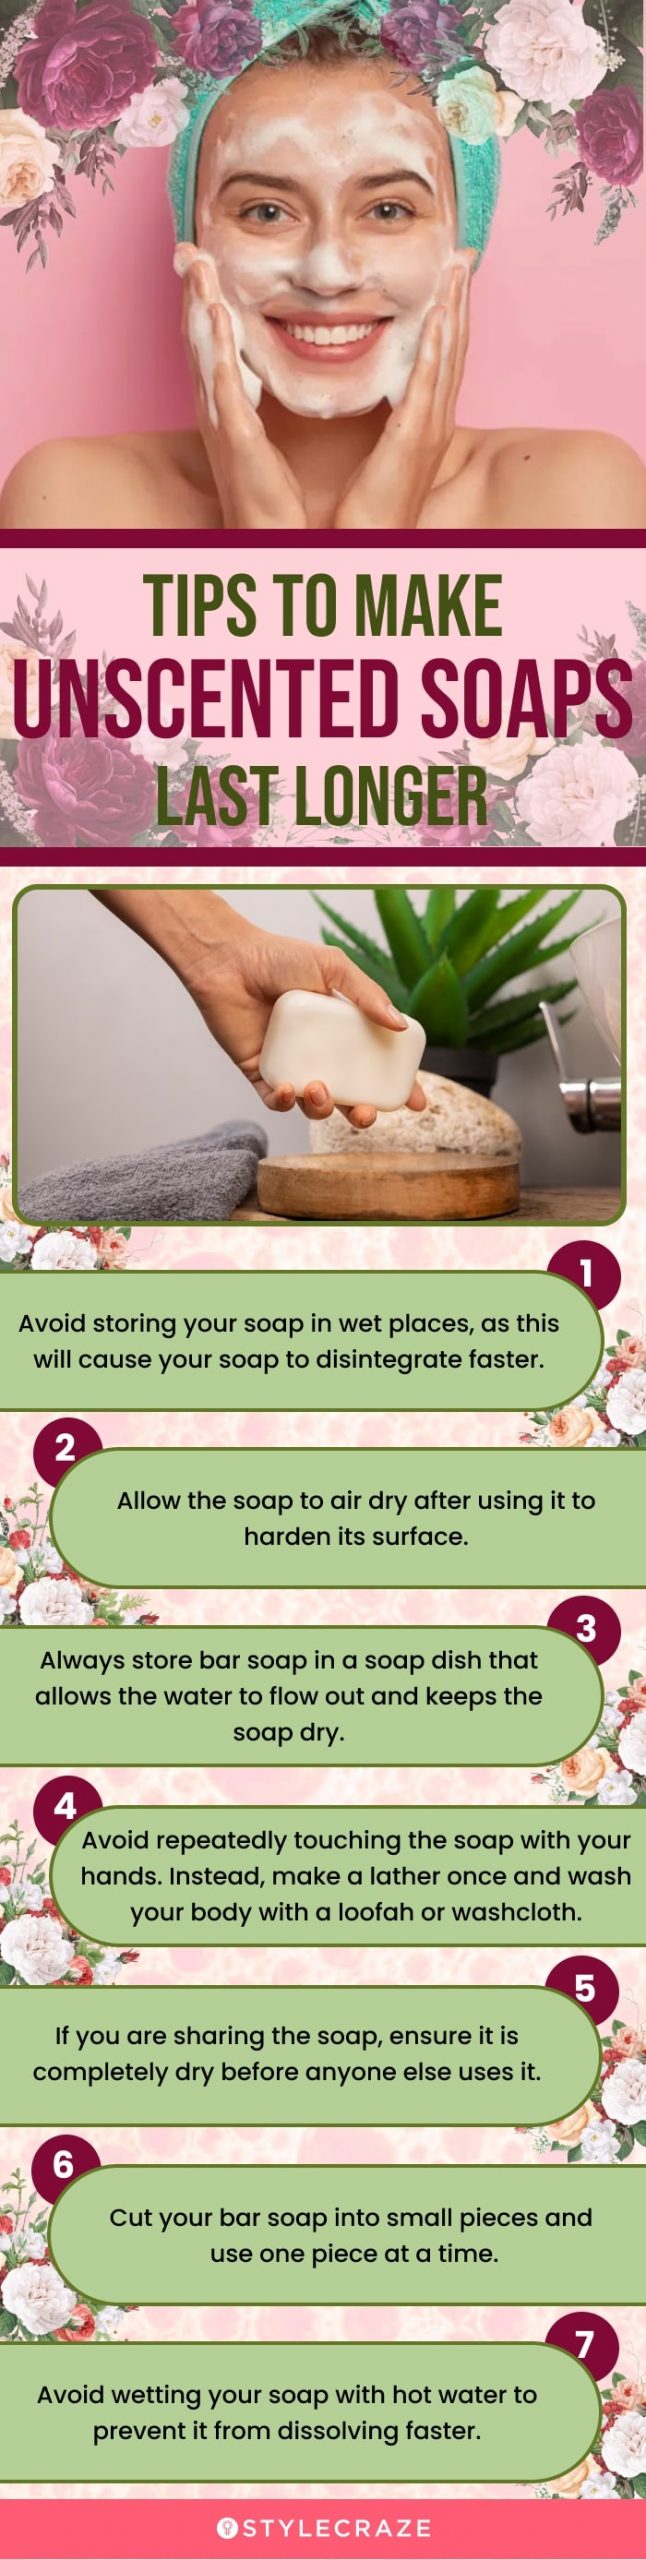 Tips To Make Unscented Soaps Last Longer (infographic)